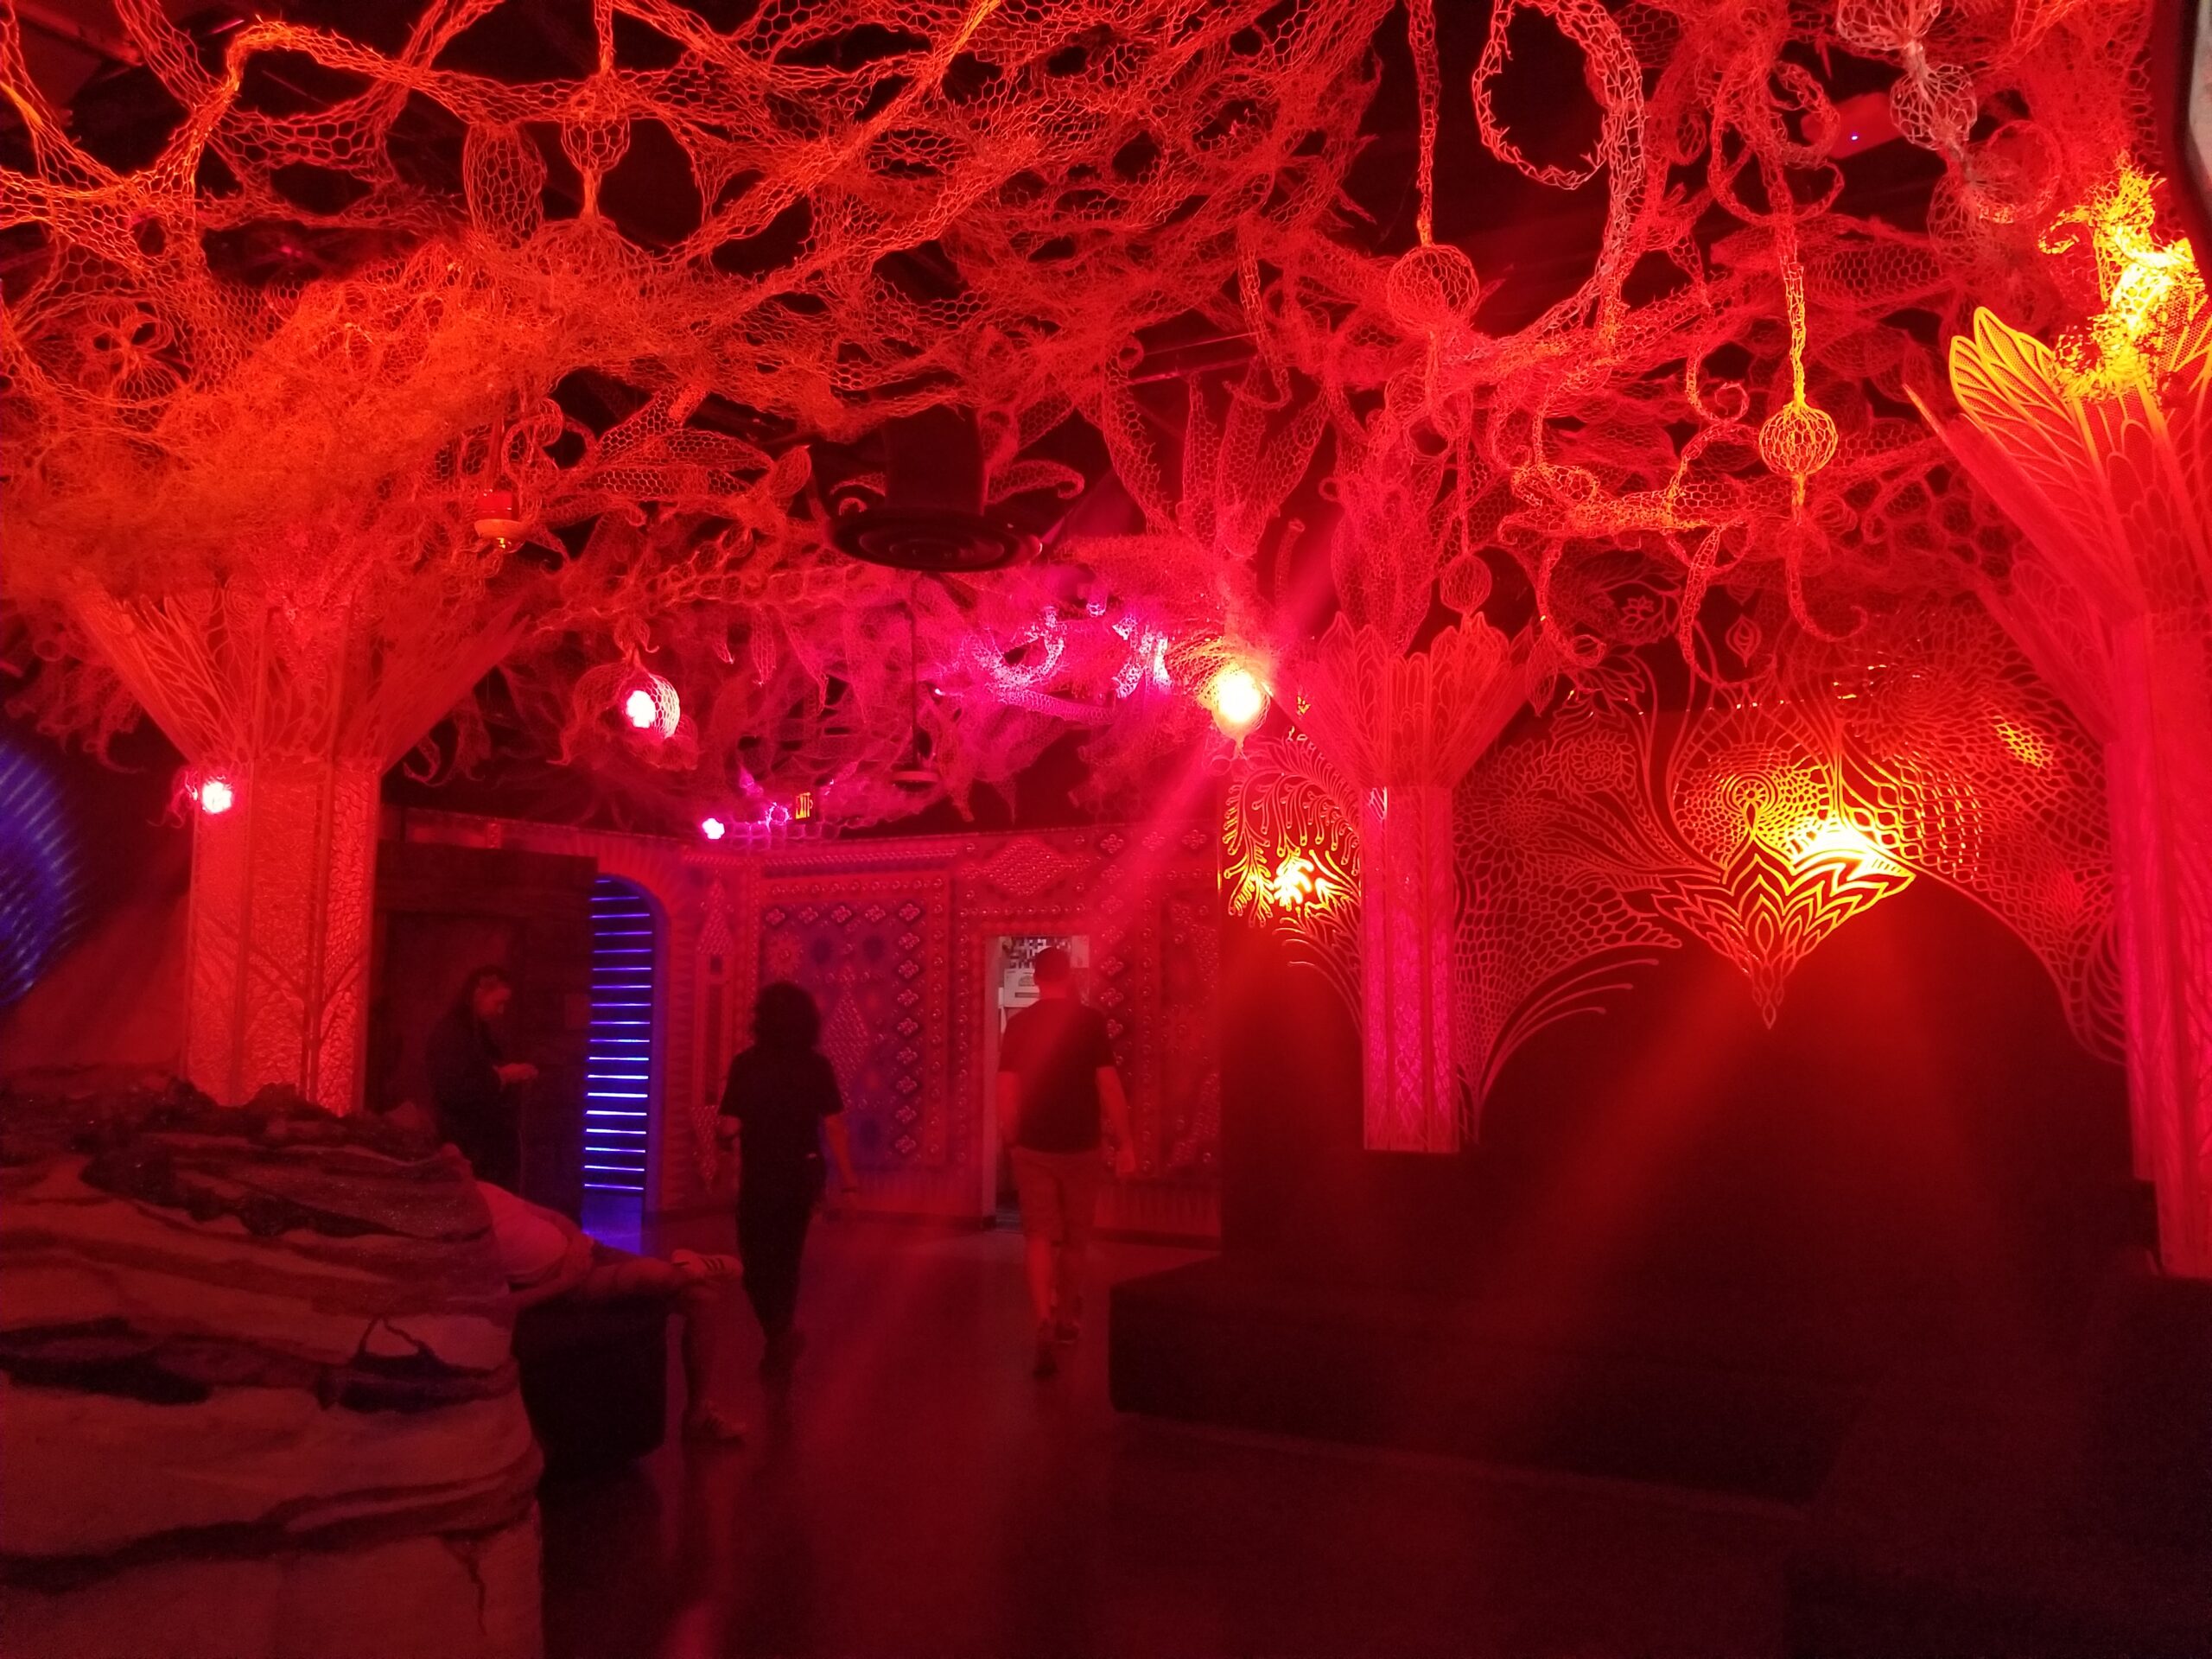 Inside the Omega Mart attraction at AREA15 in Las Vegas. This section of the exhibit features an area bathed in red light with trees that have hanging pieces similar to a willow.